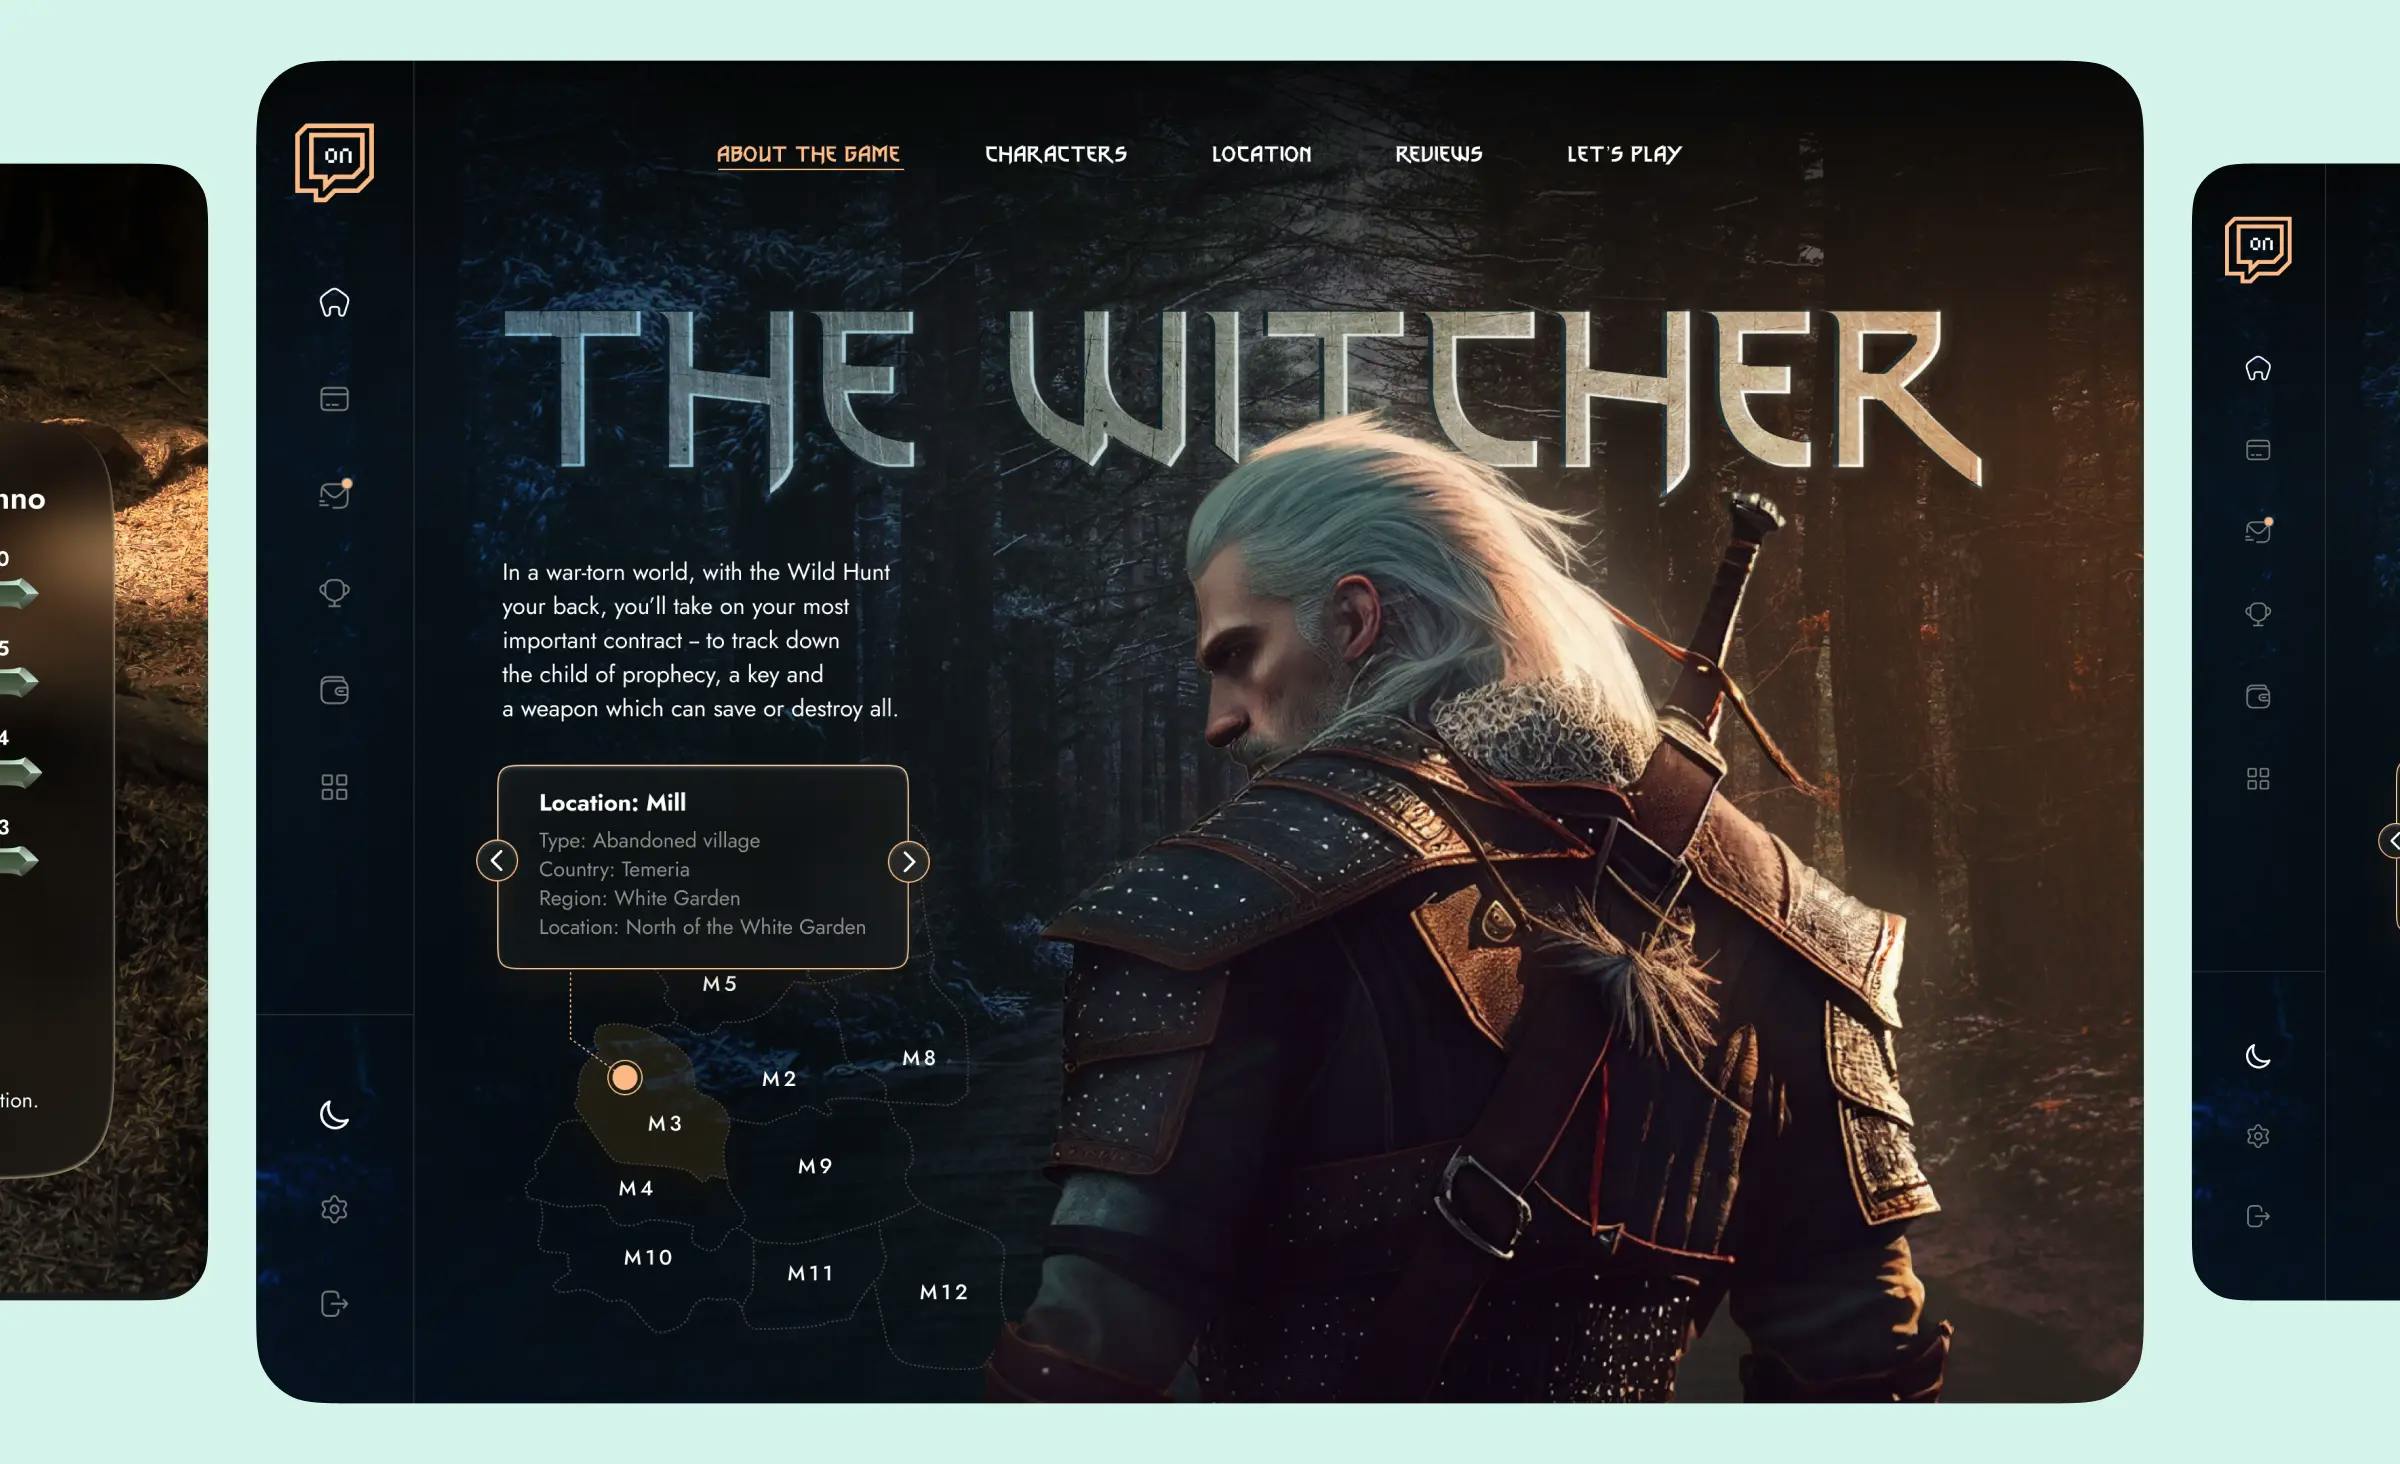 The screenshot shows the menu featuring "About the Game," "Characters," "Location," "Review," "Let’s Play" categories, and the "About the Game" page screen. We see a heading "The Witcher" on the back, and at the front, there is a figure of The Witcher, which takes half a screen. He is turning back in his armor with a sword hanging on his shoulder. On the screen, a user can also read a short description of the game and click on game locations. It’s a Dribbble shot by Ronas IT, which helps to see how to build a game website that will captivate attention.